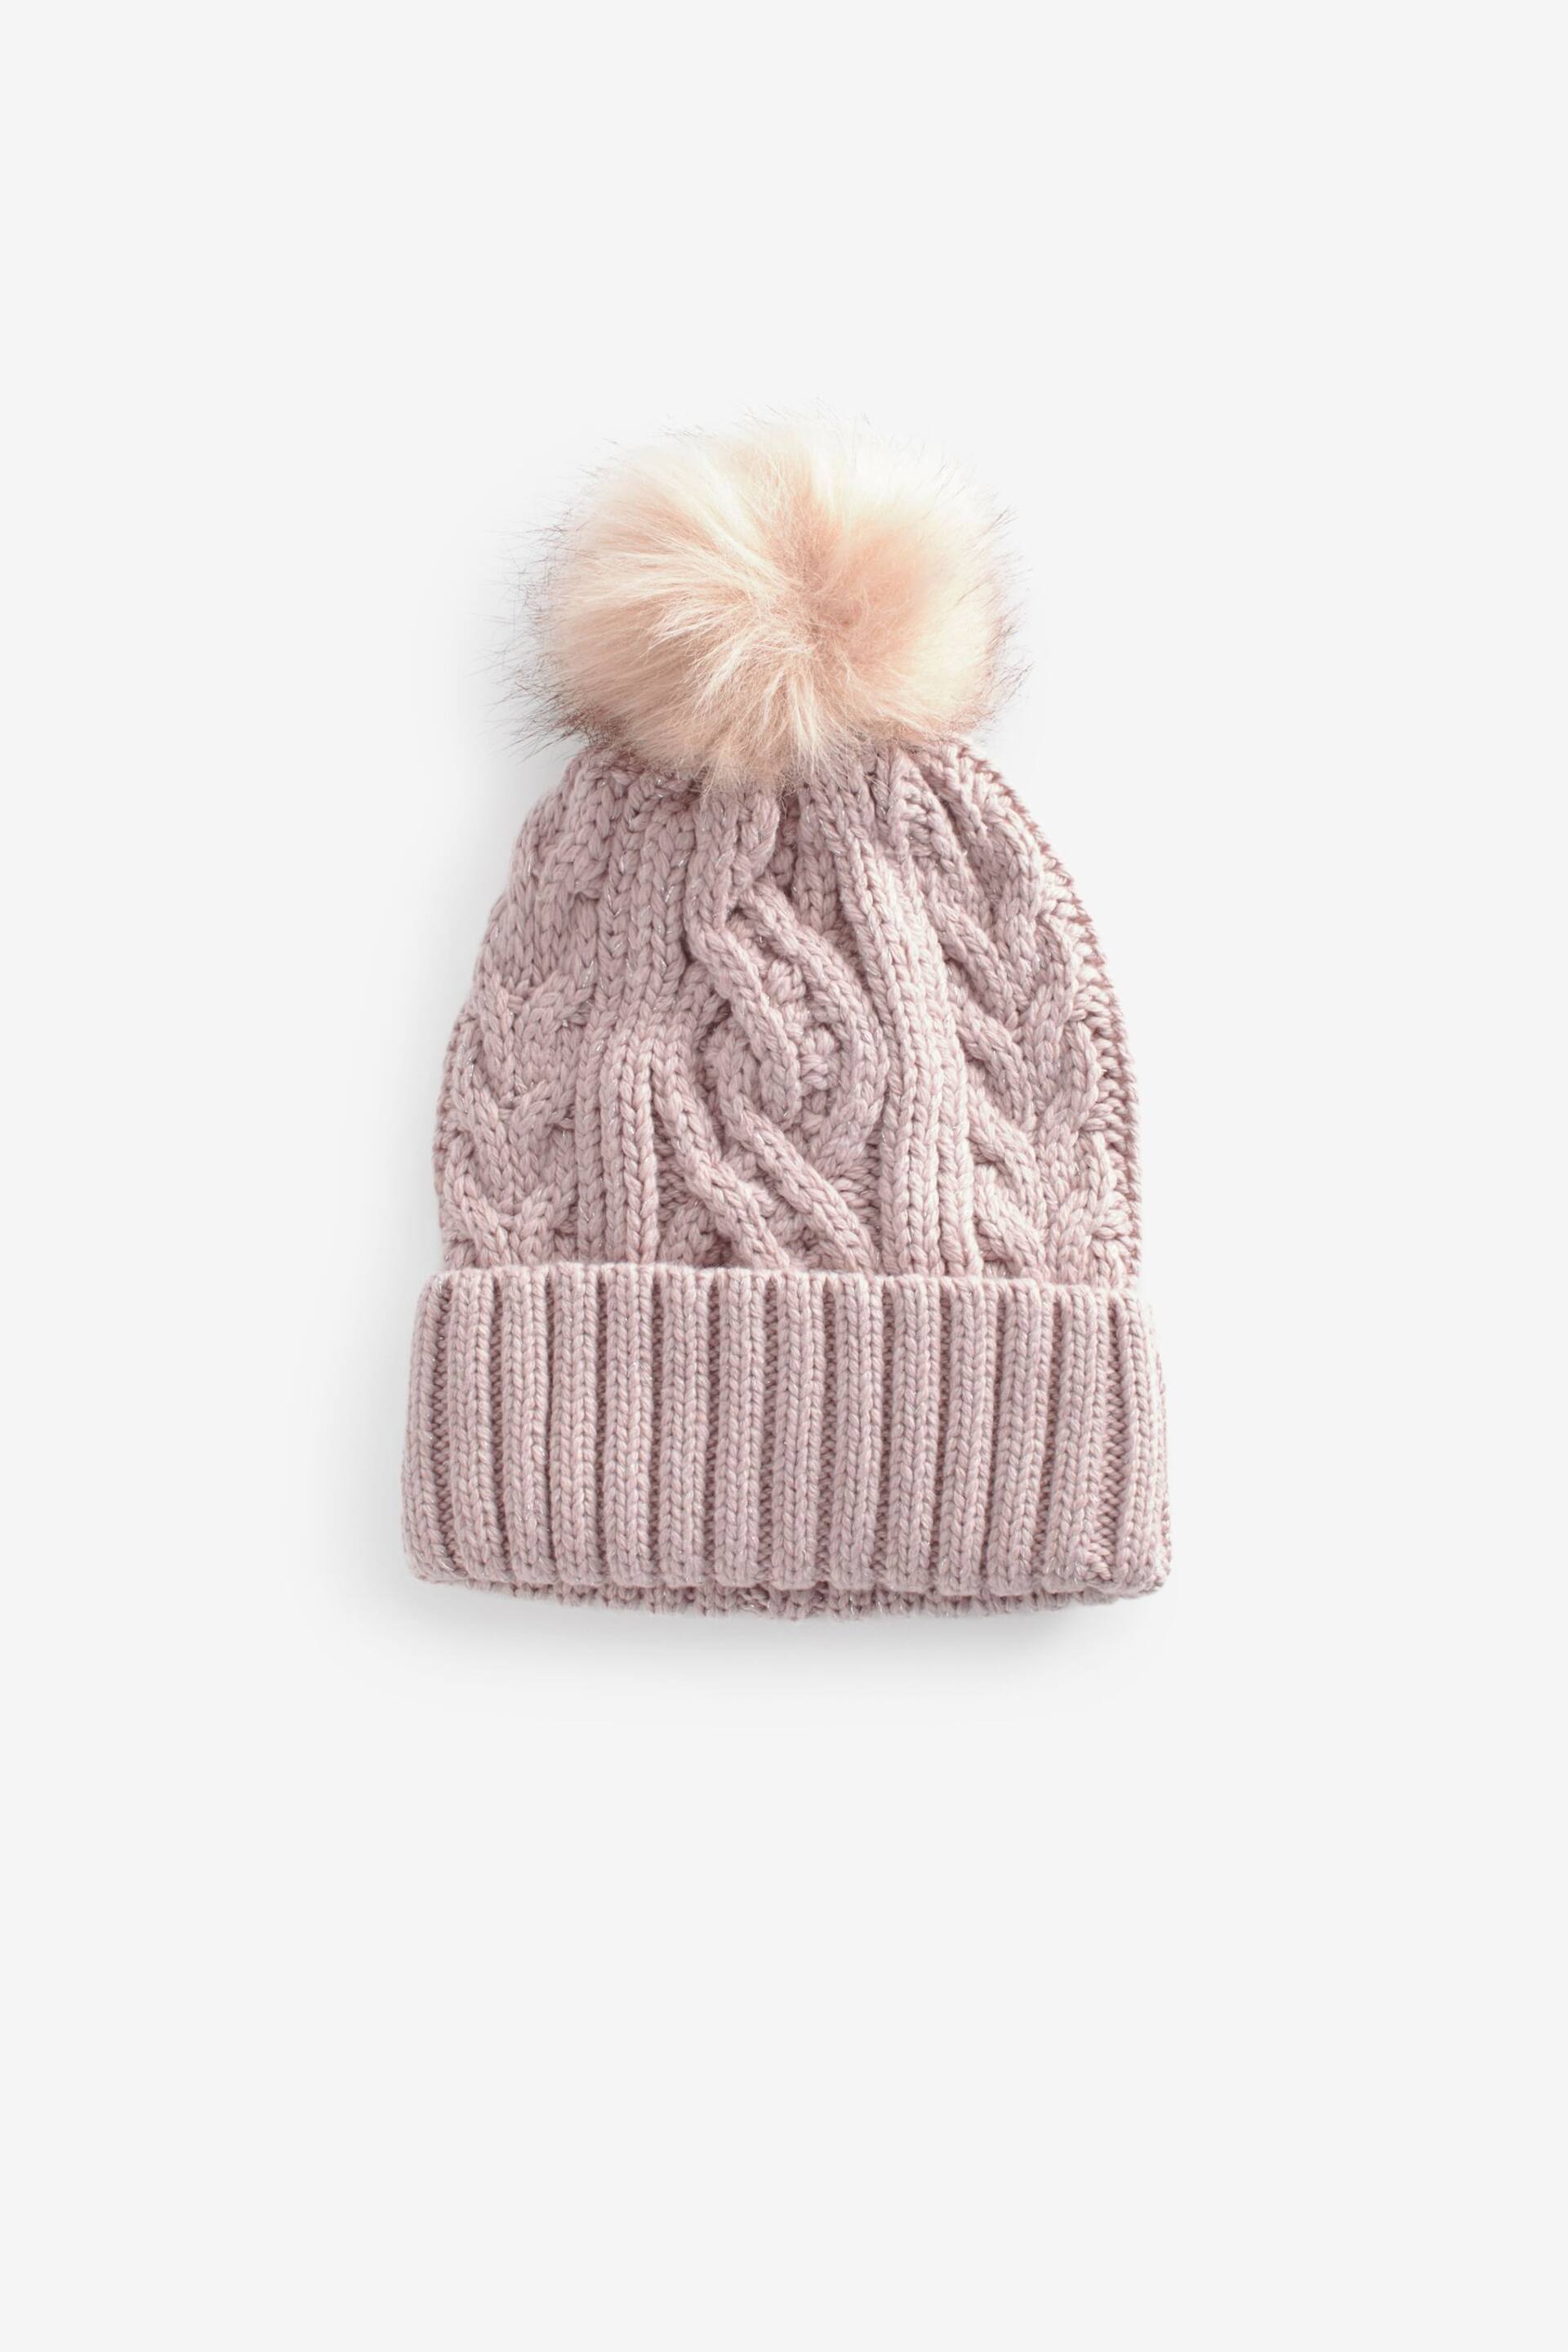 Pink Sparkle Cable Knit Pom Hat - Image 3 of 3